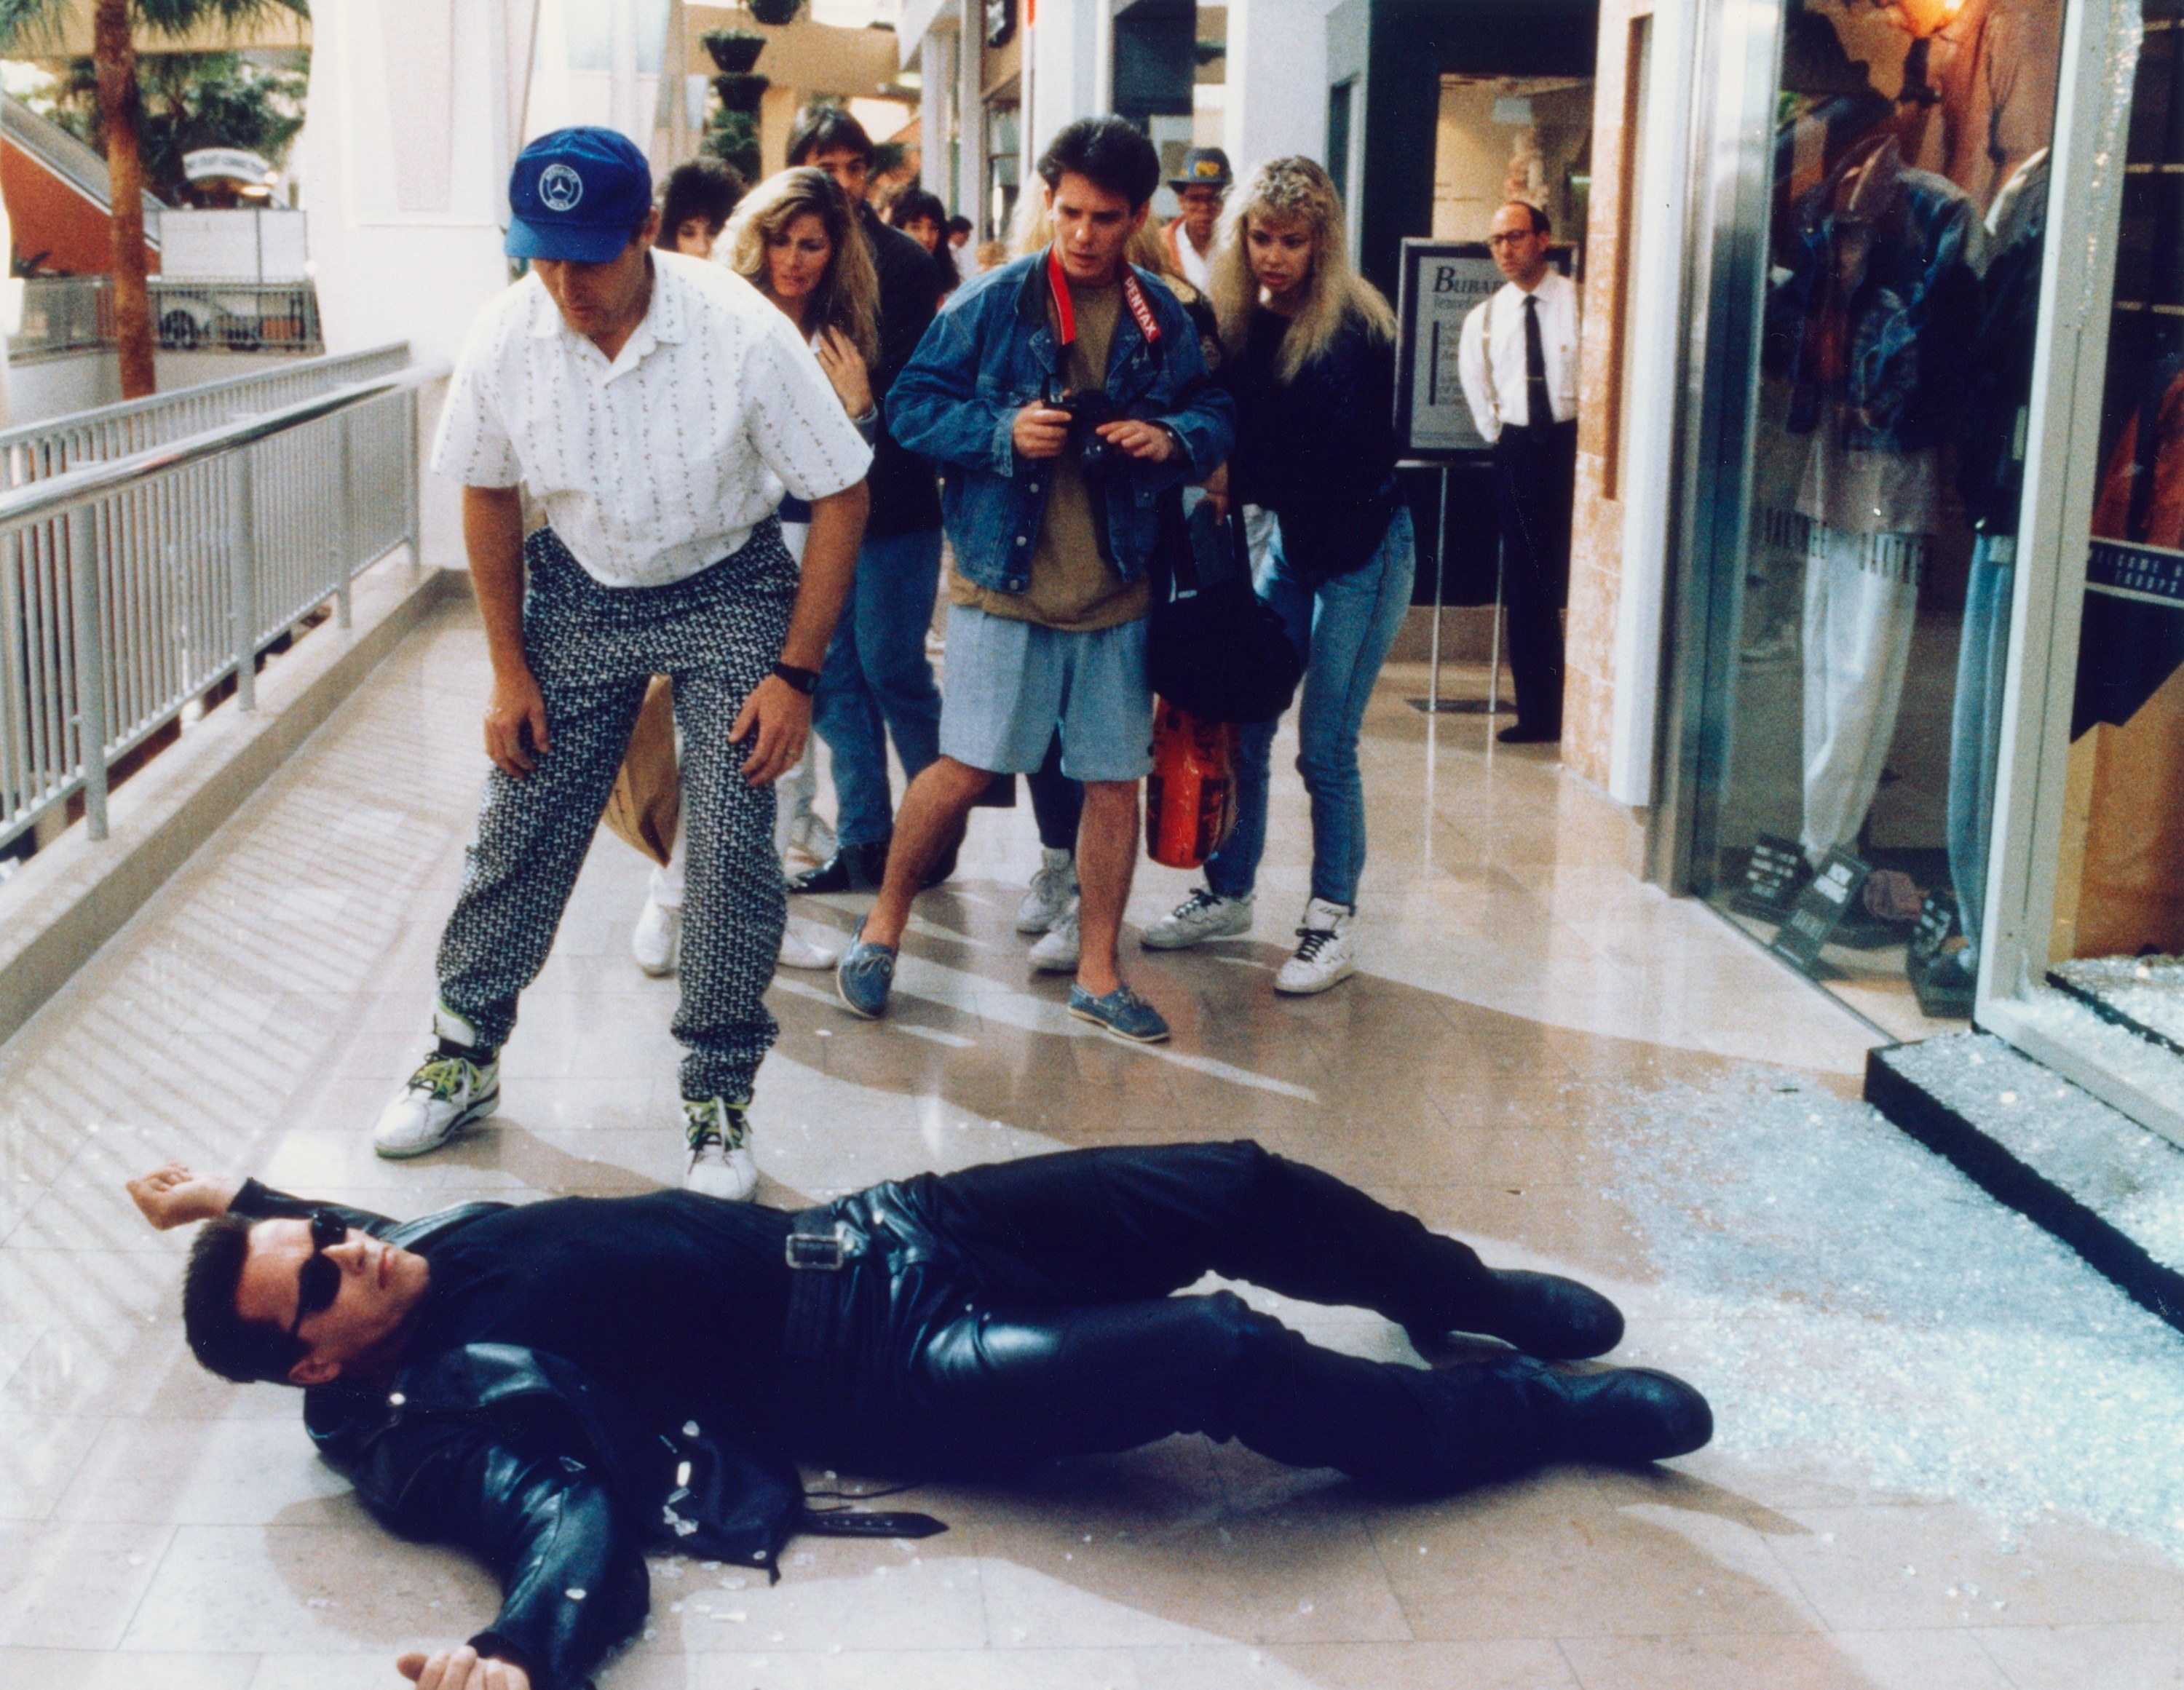 Arnold Schwarzenegger lays on the floor of a mall while shoppers look on